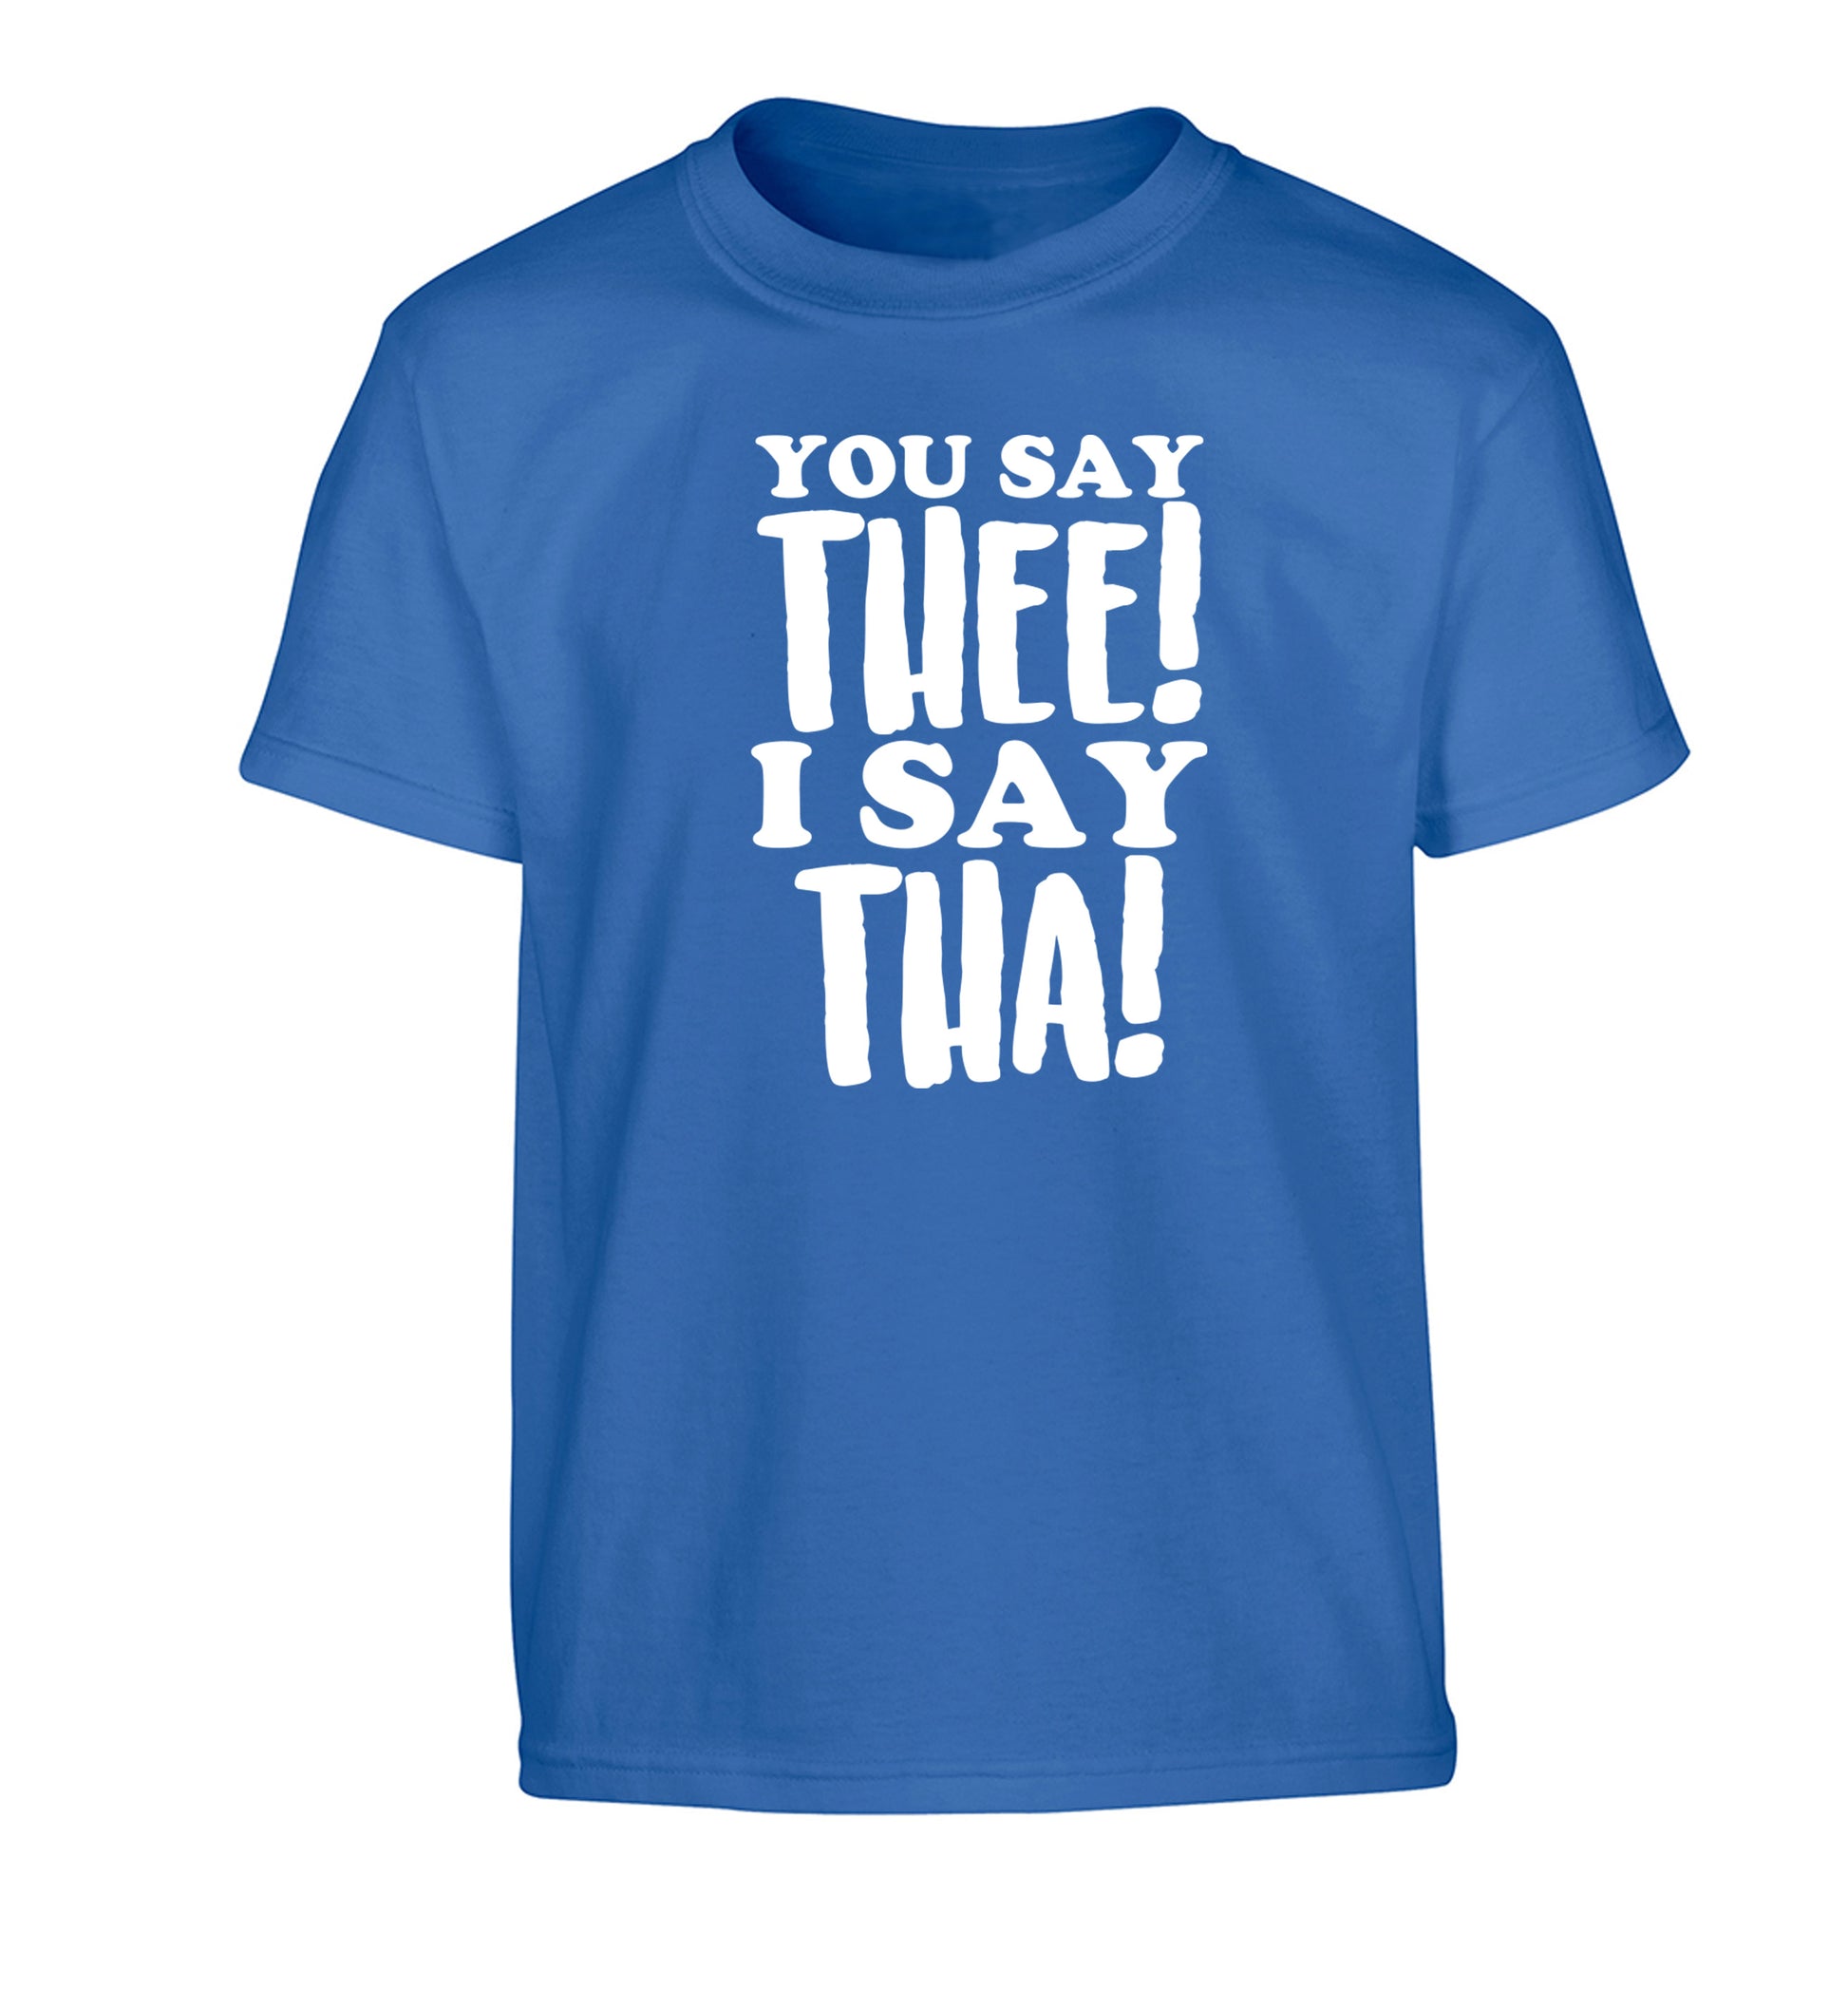 You say thee I say tha Children's blue Tshirt 12-14 Years